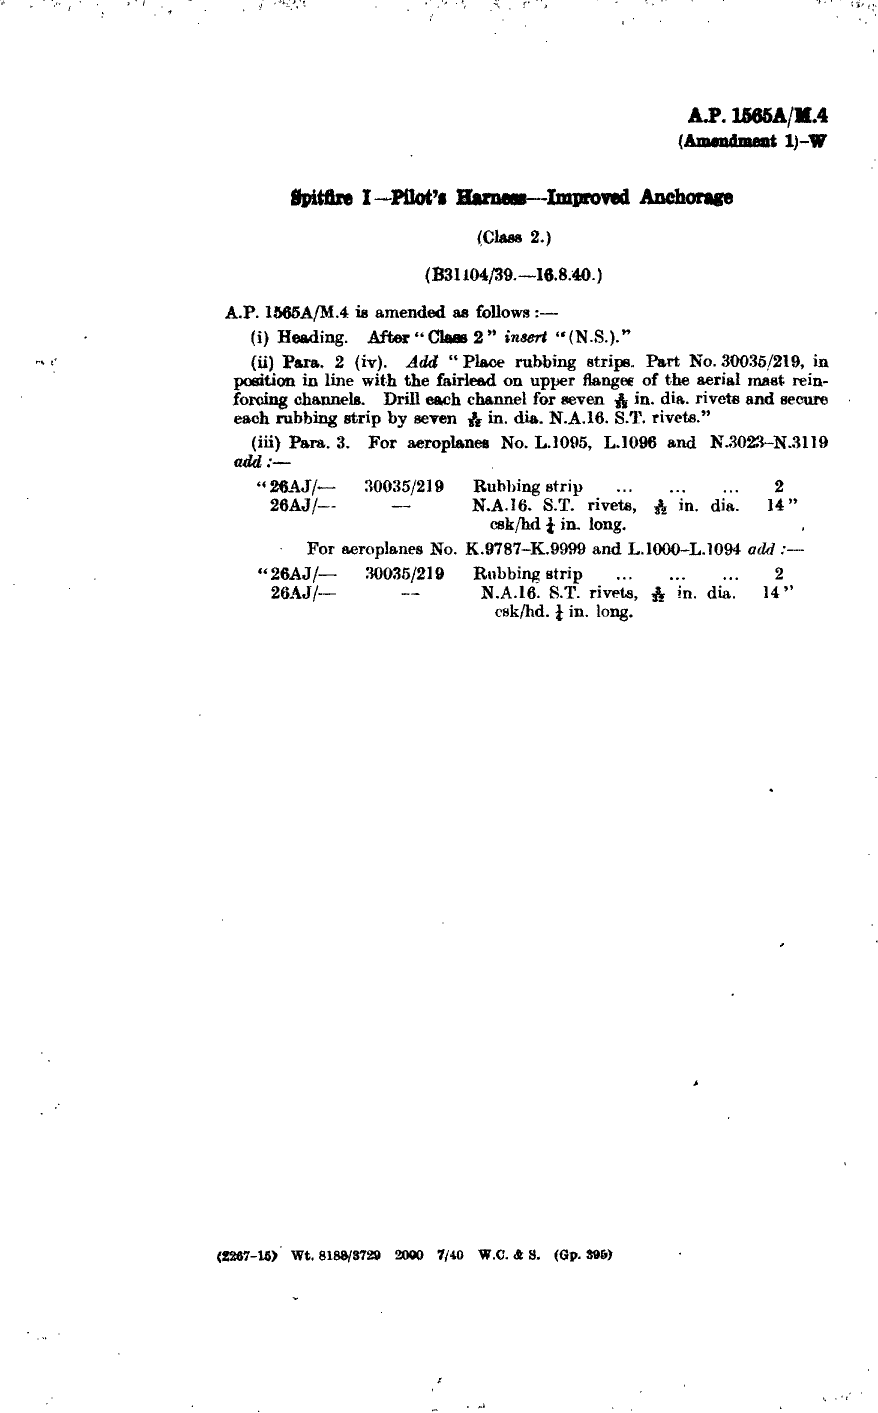 Sample page 1 from AirCorps Library document: Spitfire I Pilots Harness Improved Anchorage